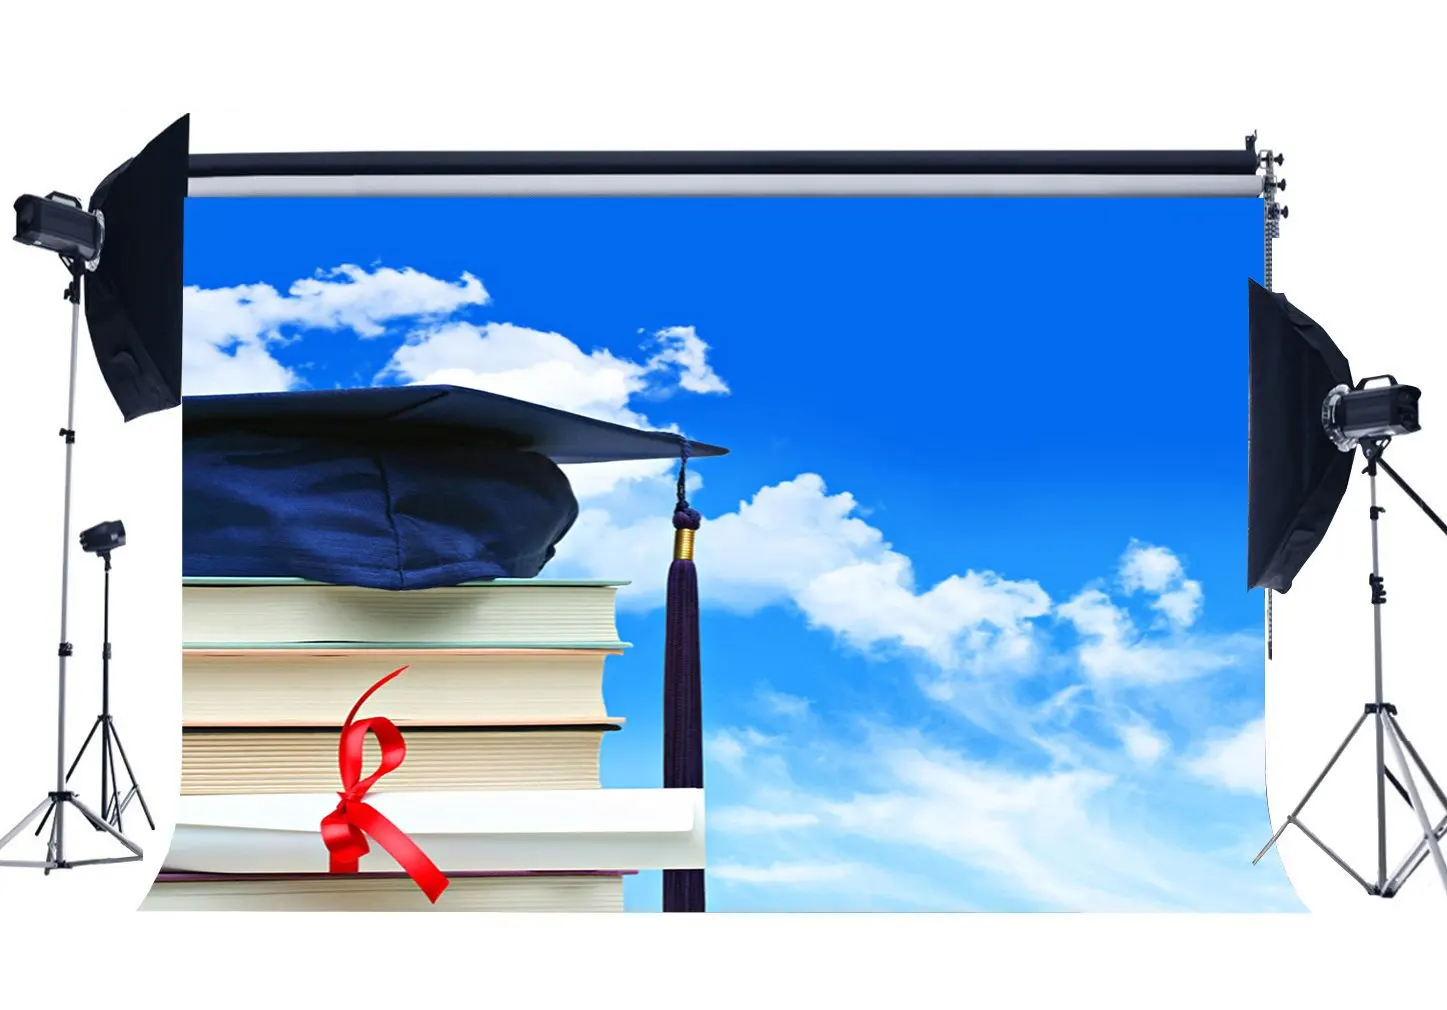 

Graduation Ceremony Backdrop Degree's Diploma and Trencher Cap Backdrops Books Blue Sky White Cloud Background